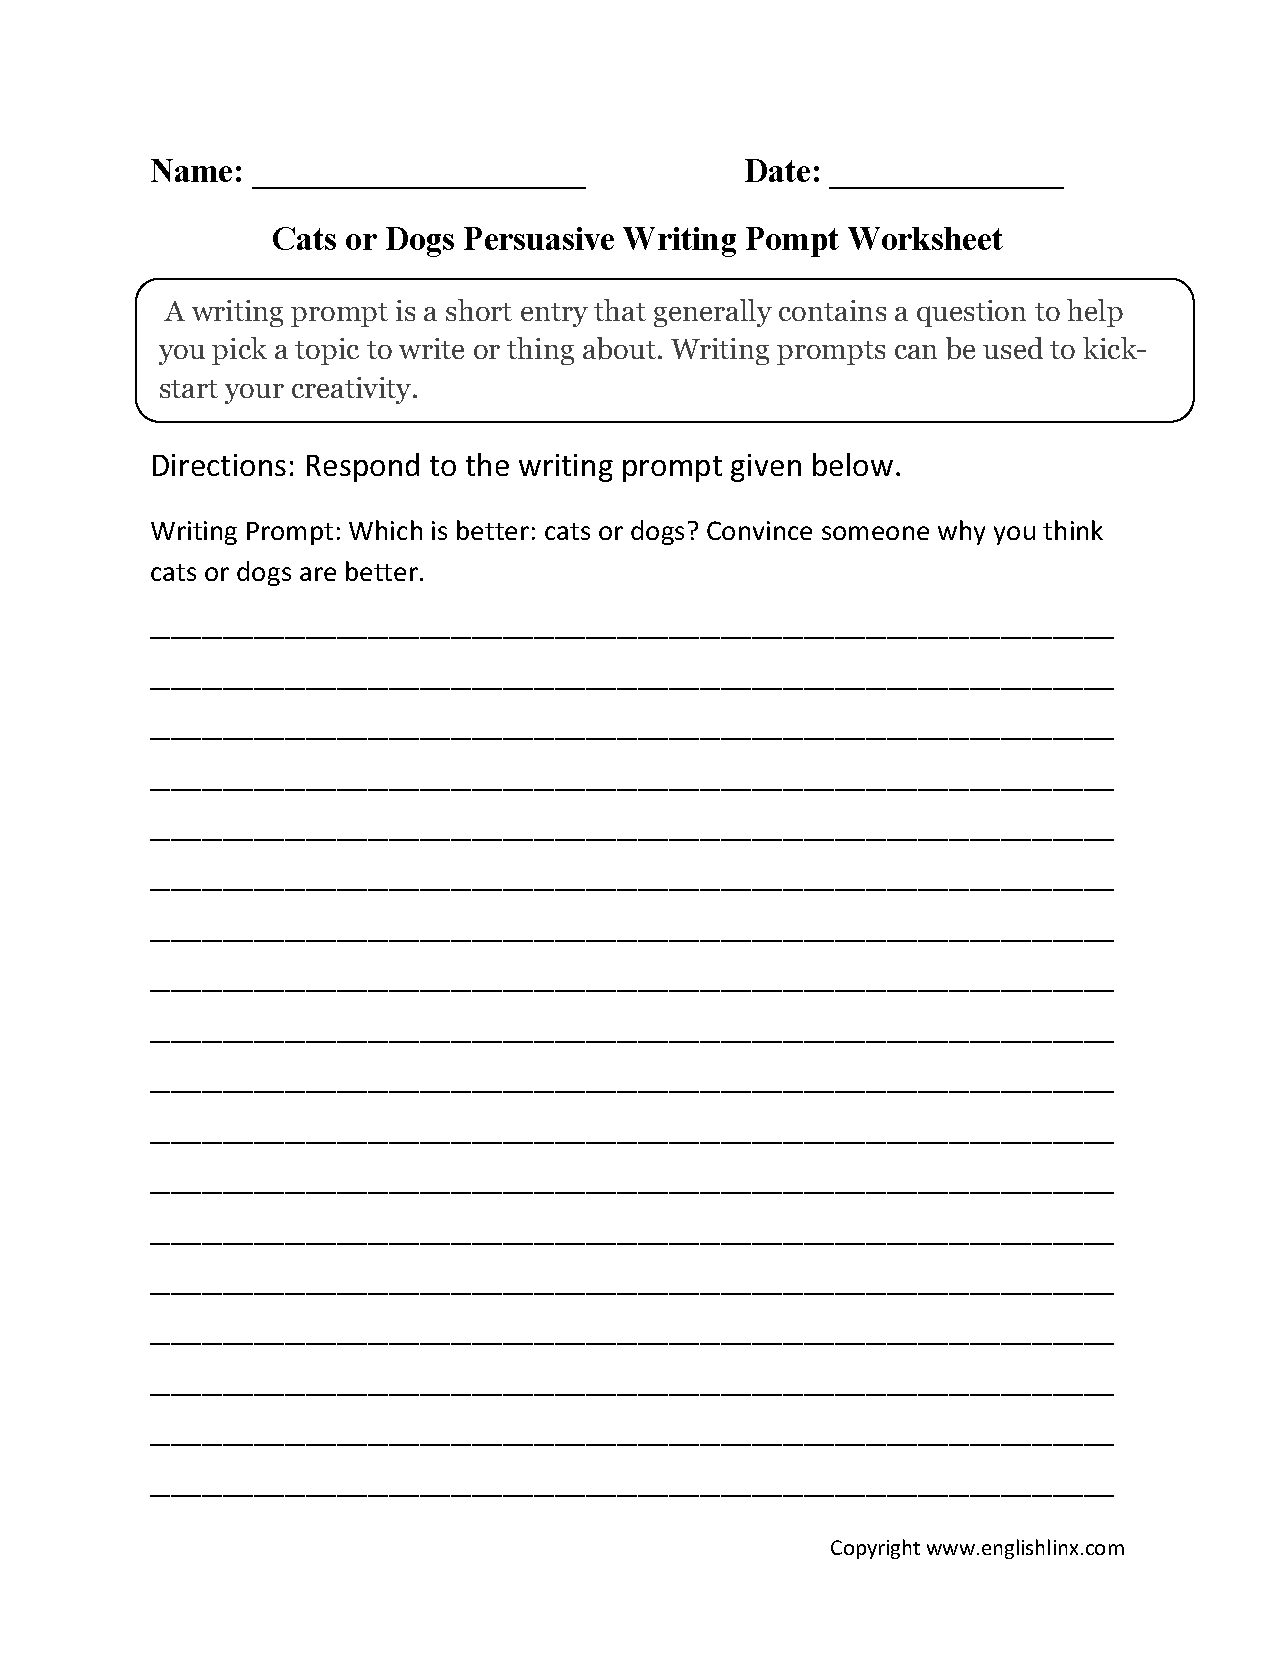 Dogs or Cats Persuasive Writing Prompt Worksheets